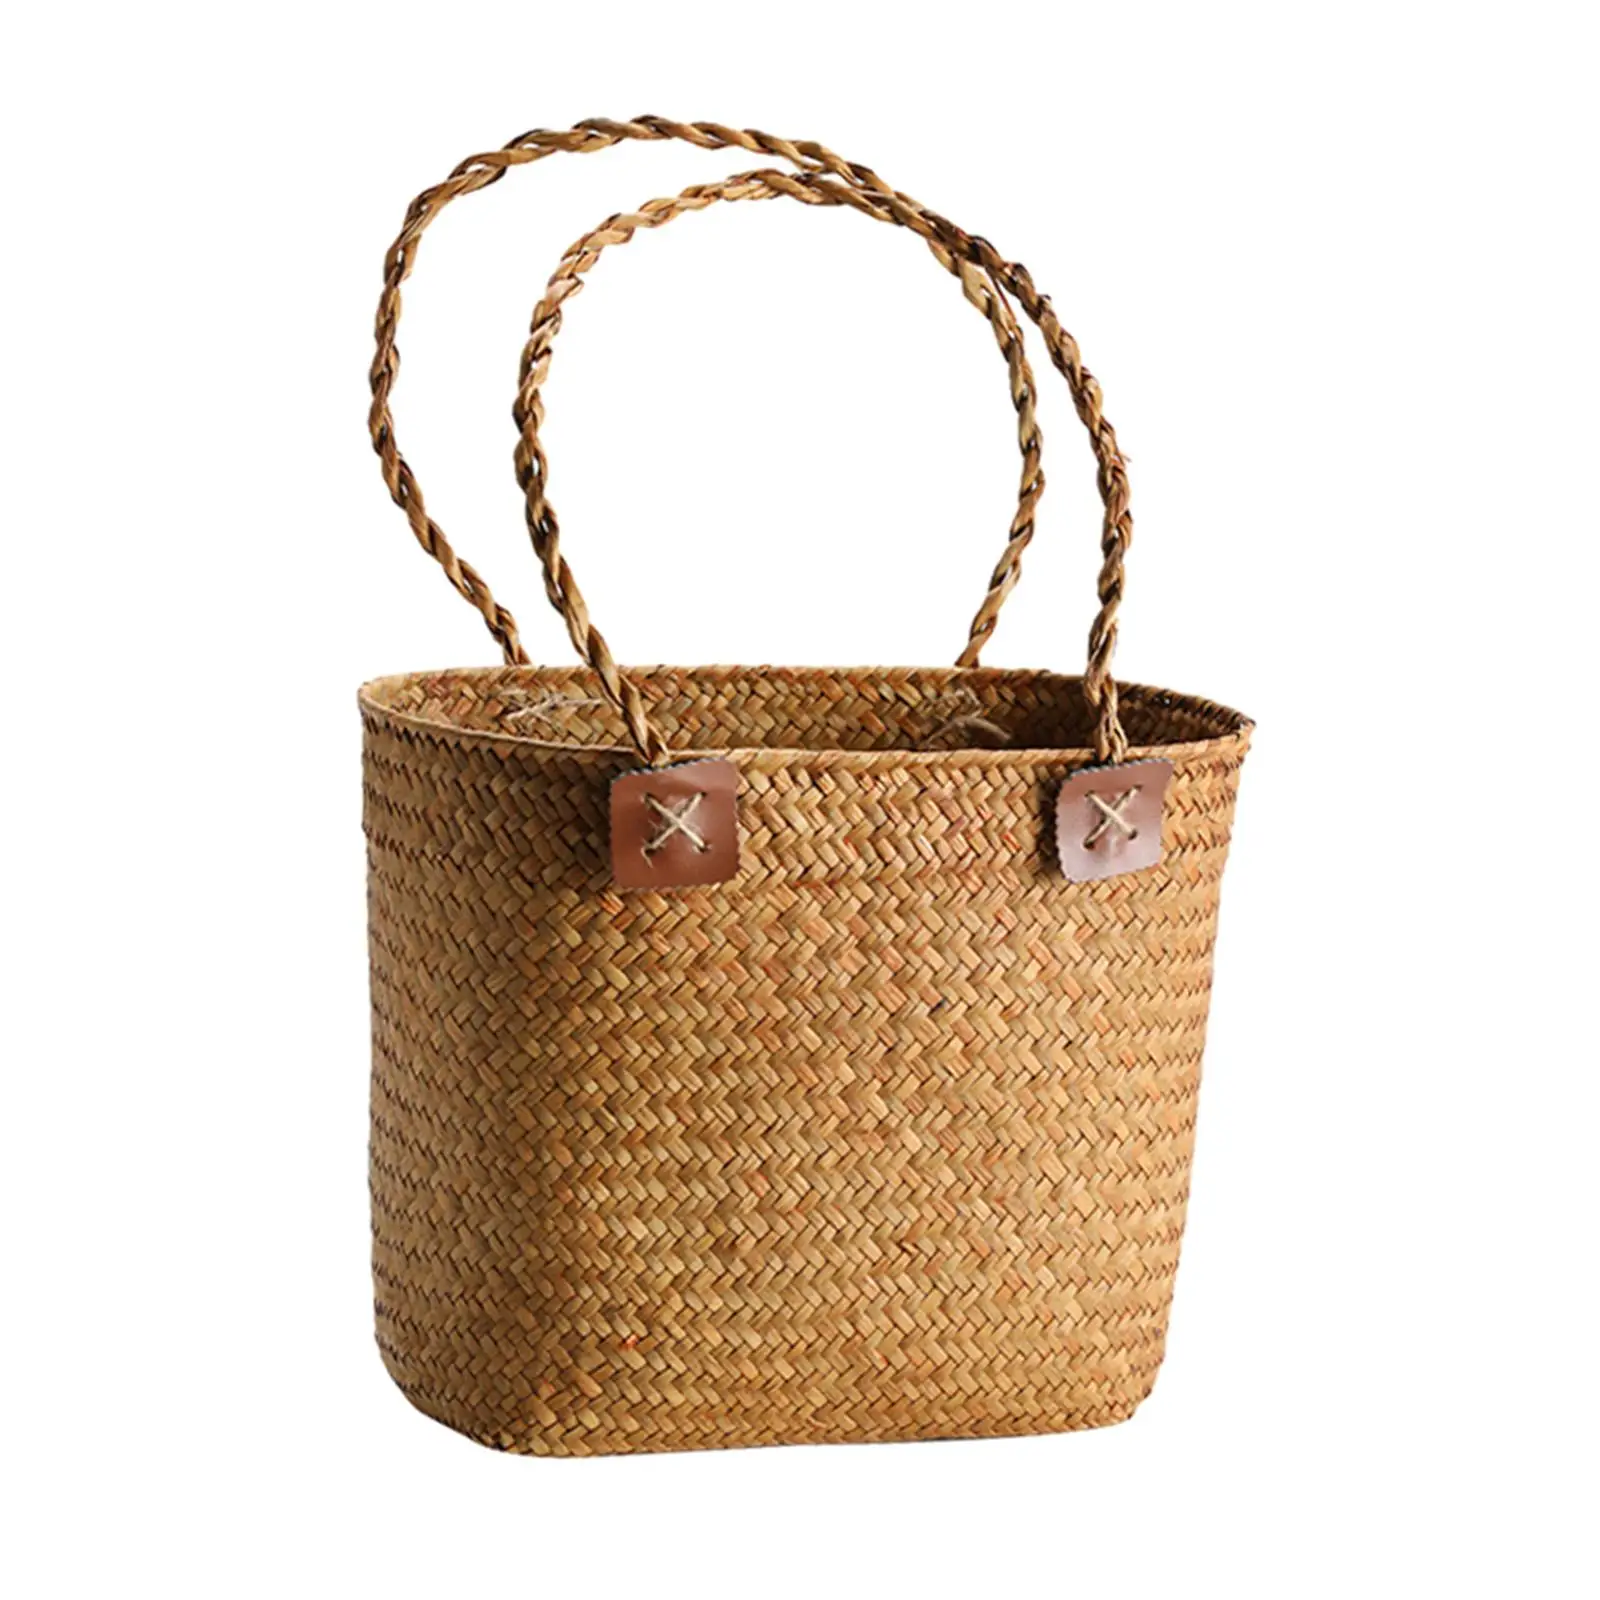 Handwoven Storage Basket with Handle Multipurpose Portable Market Basket Bread Storage Basket for Camping Home Travel Hiking